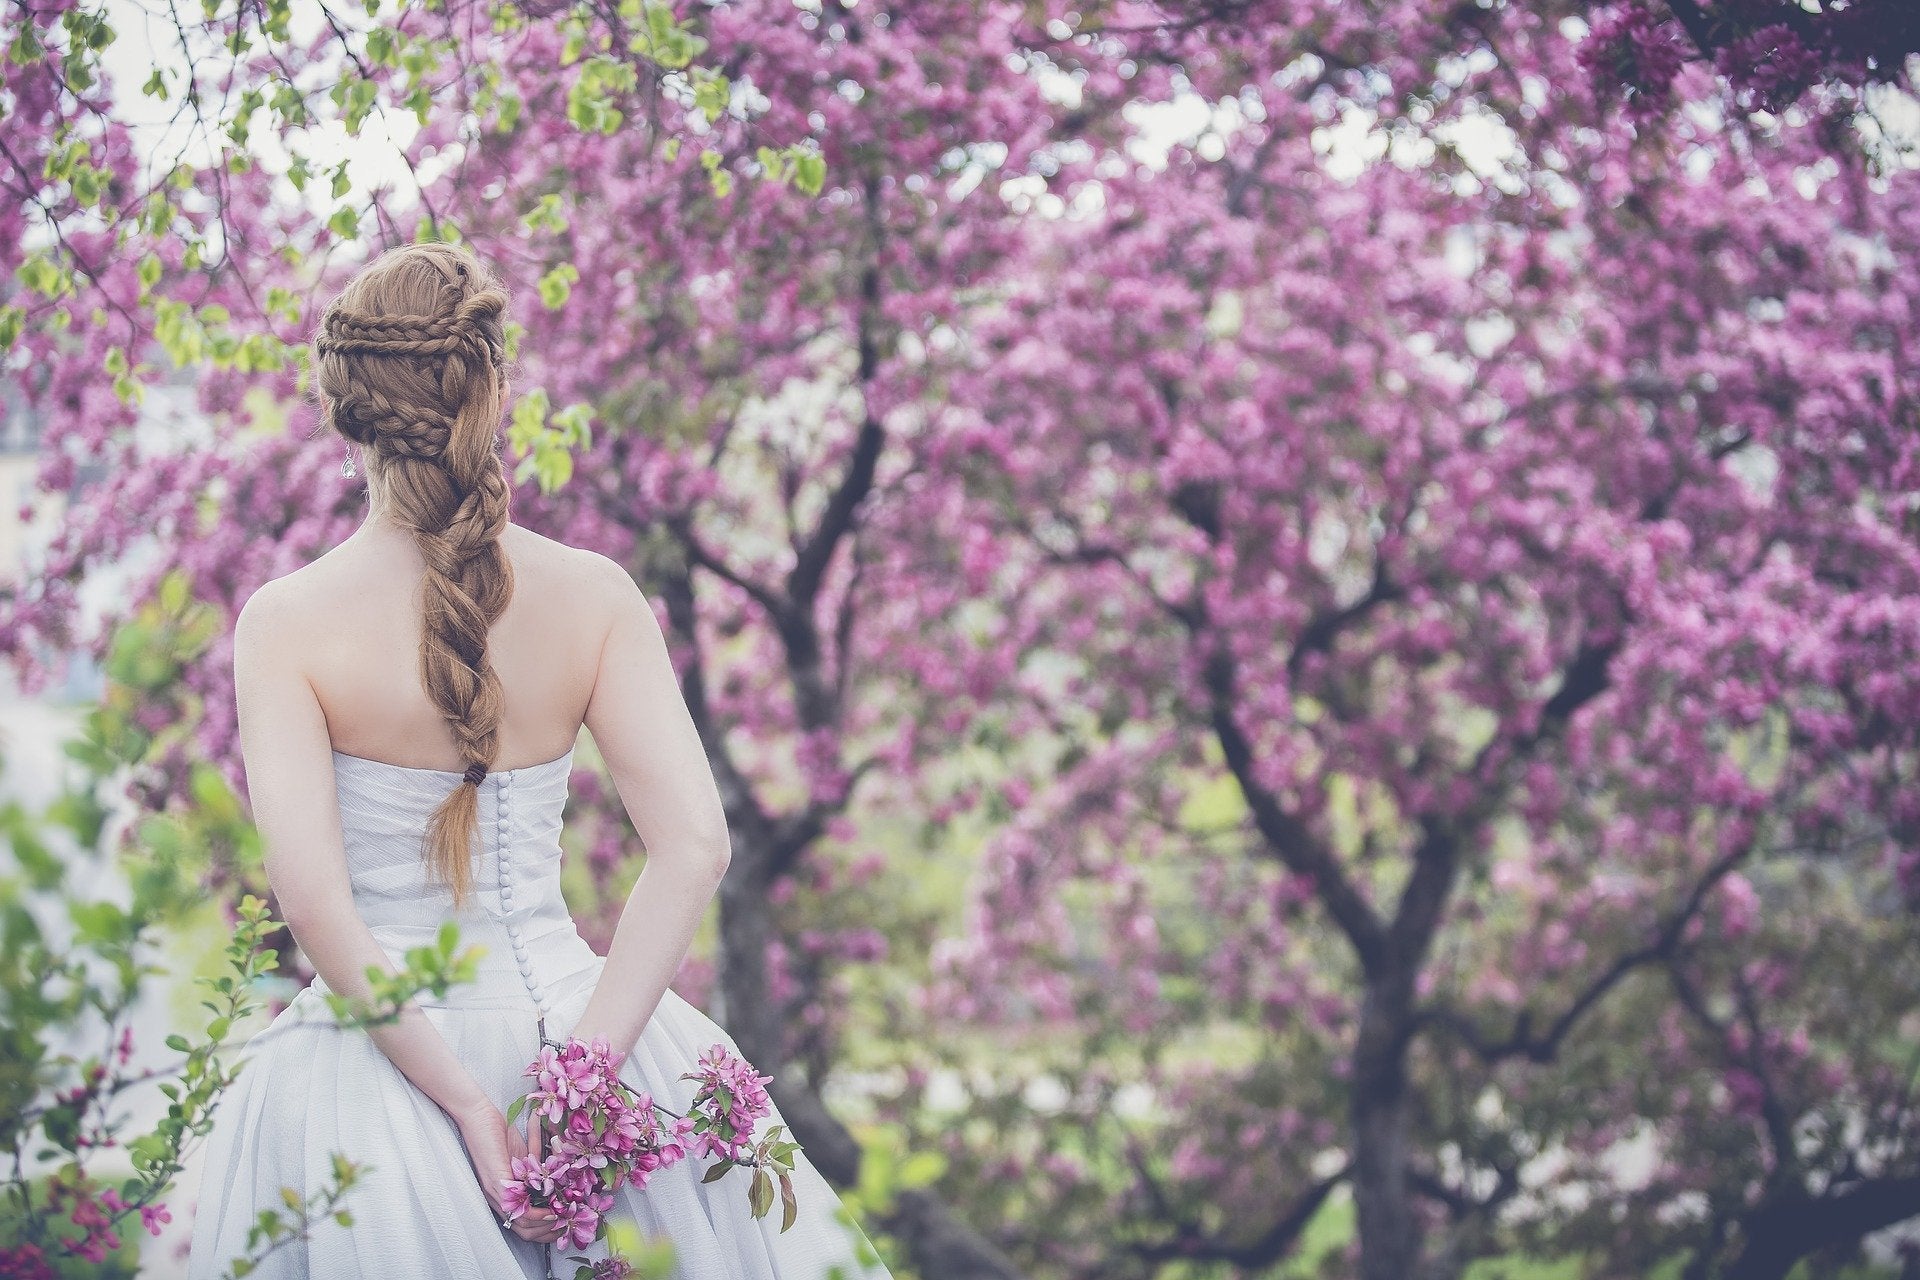 The Top 5 Wedding Trends You Should Know About